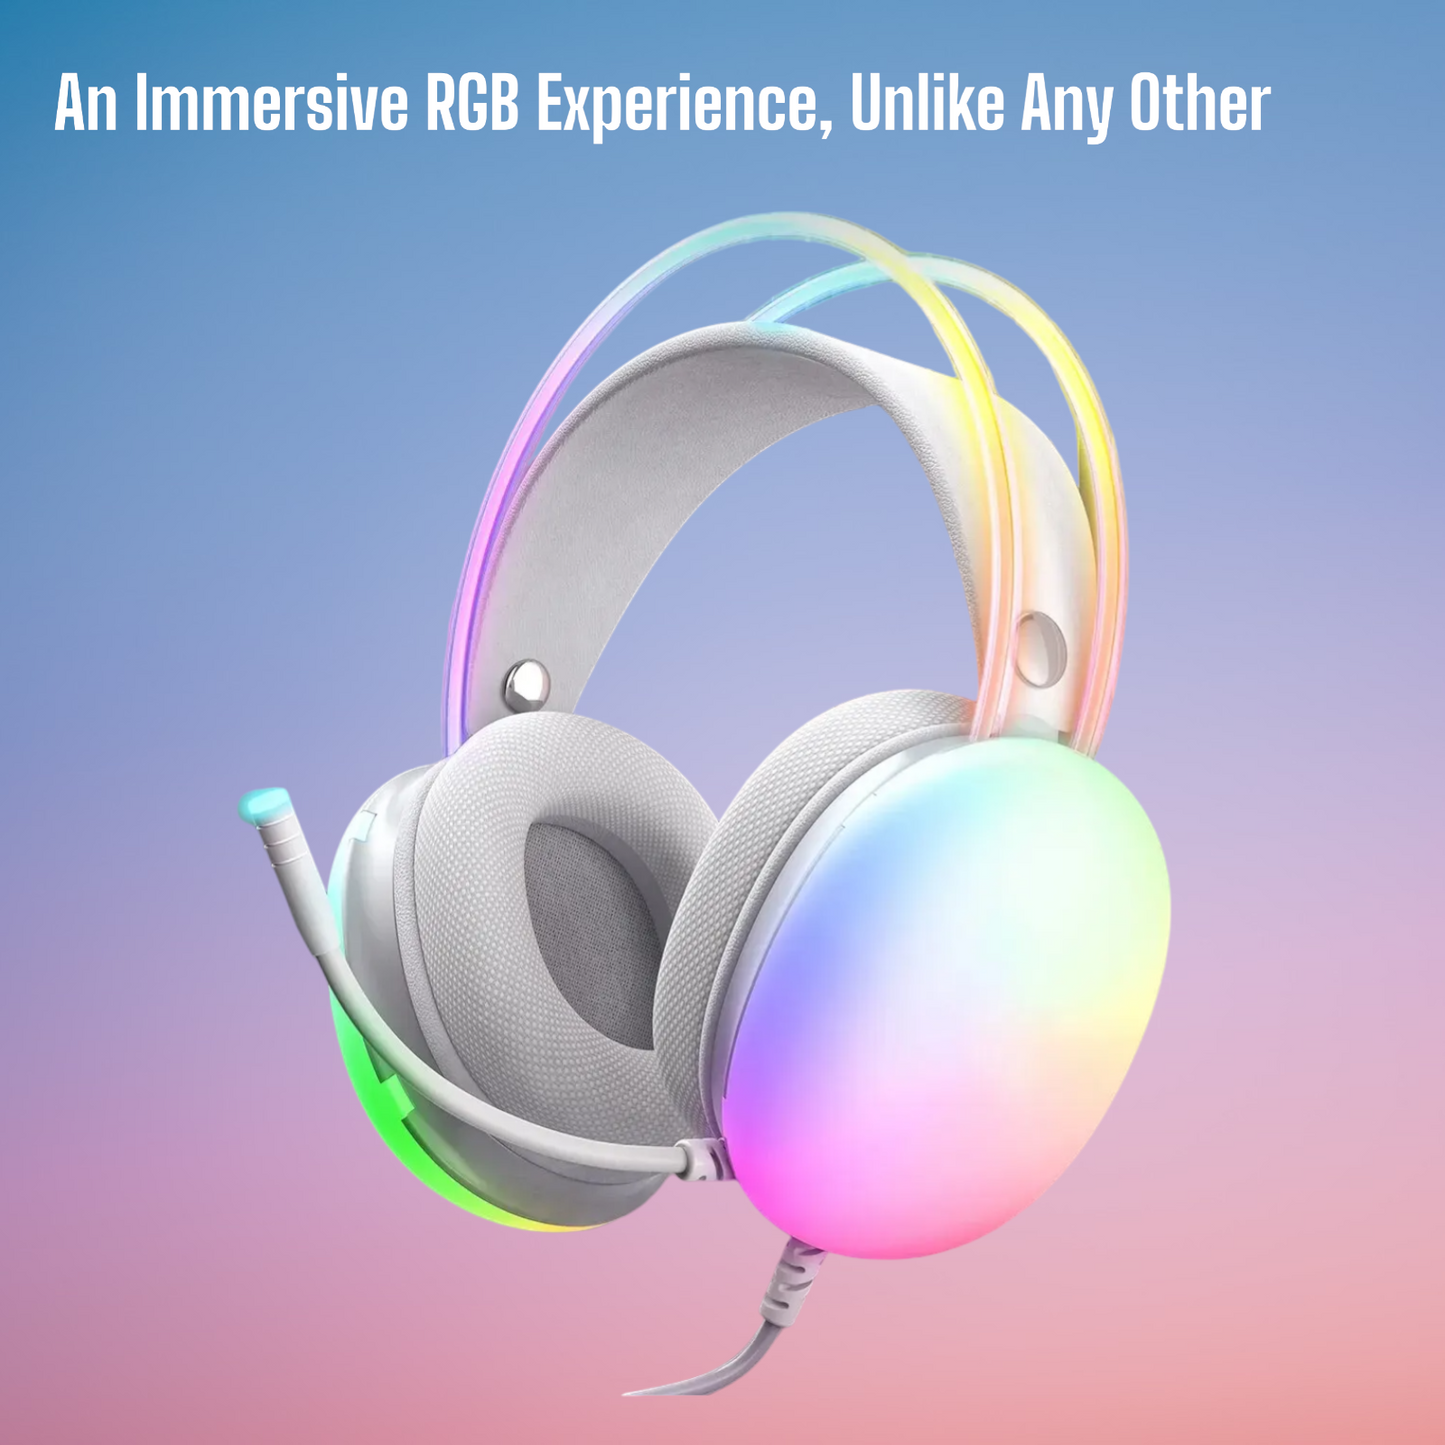 RGB PC Gaming Headset with Memory Foam Ears